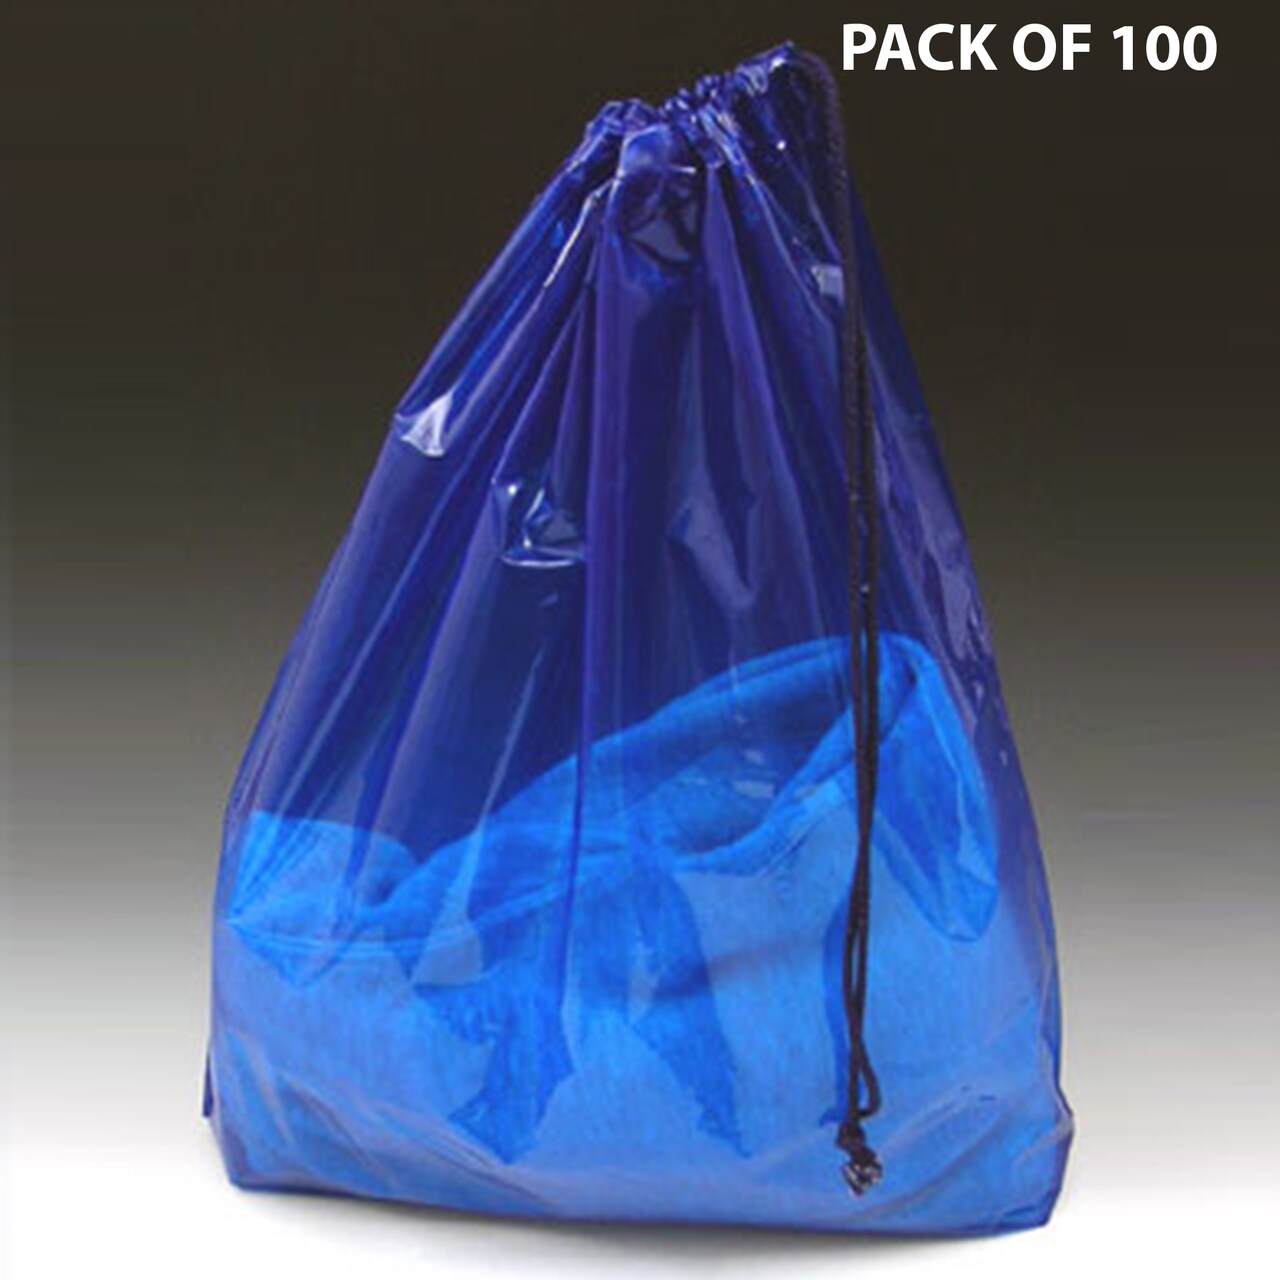 Clear Plastic Drawstring Bags - The One Packing Solution